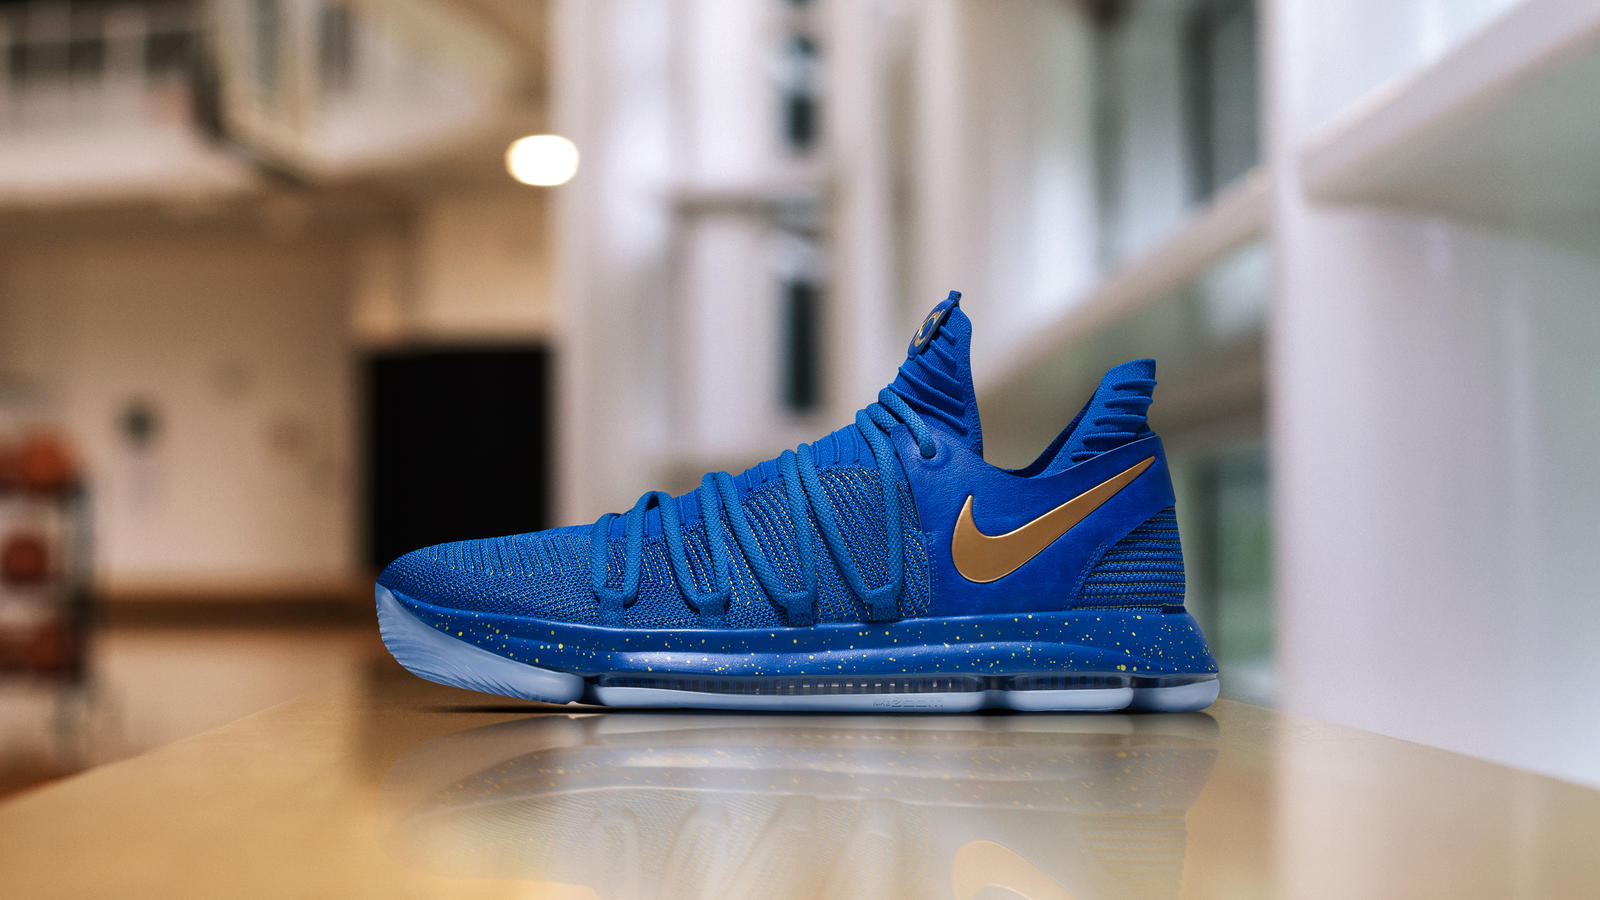 kd 10 blue and yellow